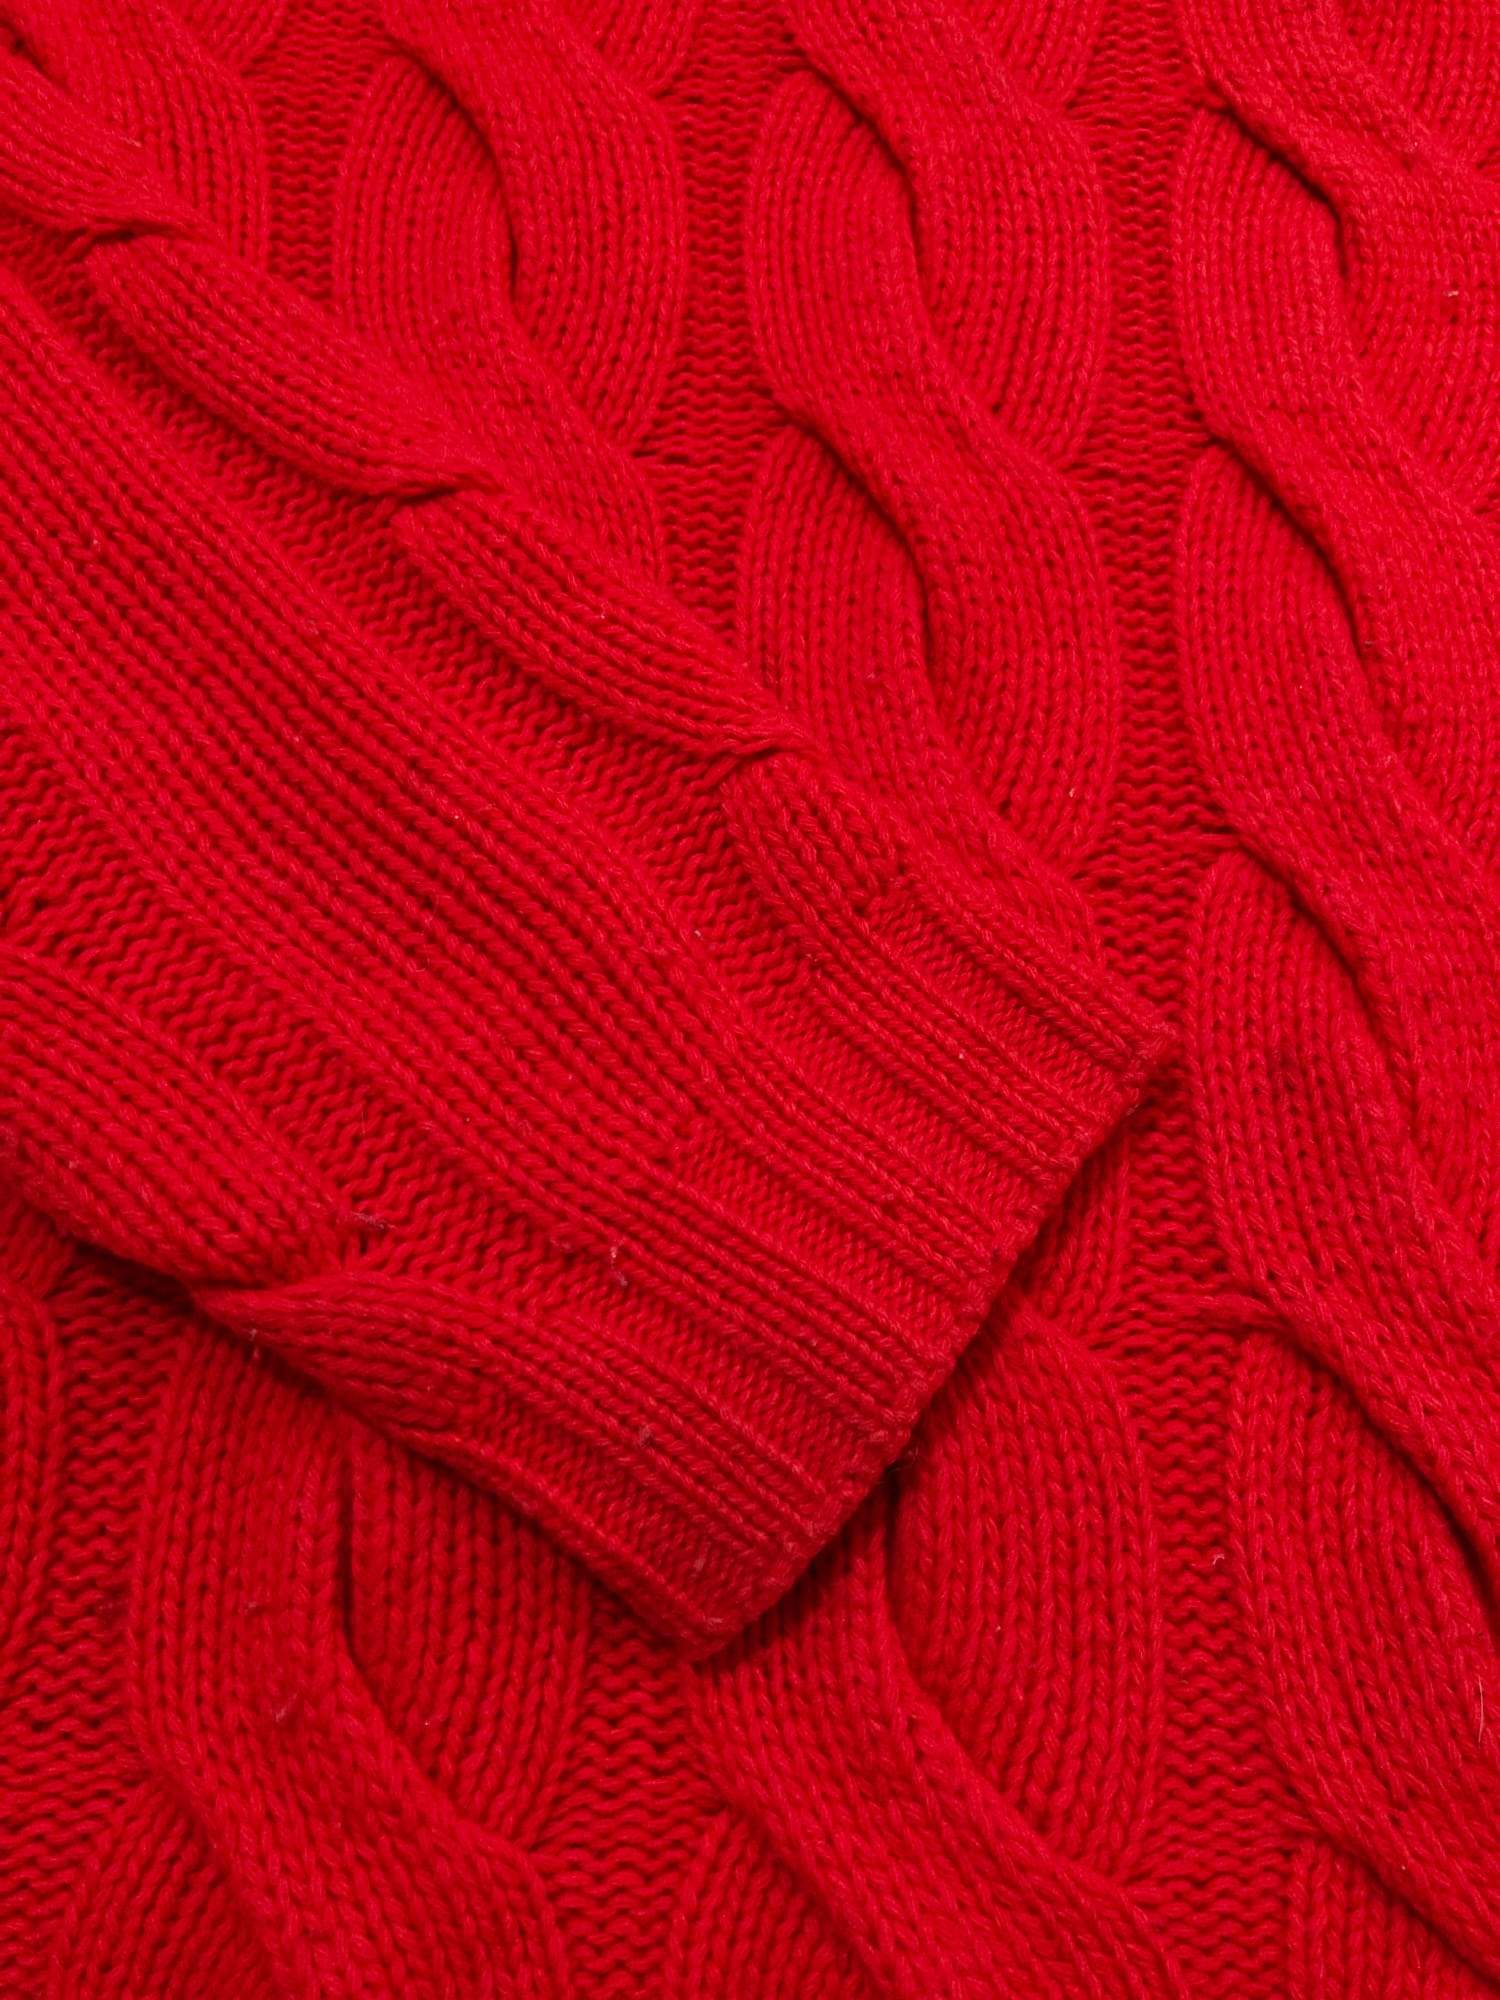 Dirk Bikkembergs 1990s 2000s red wool cable knit turtleneck jumper S